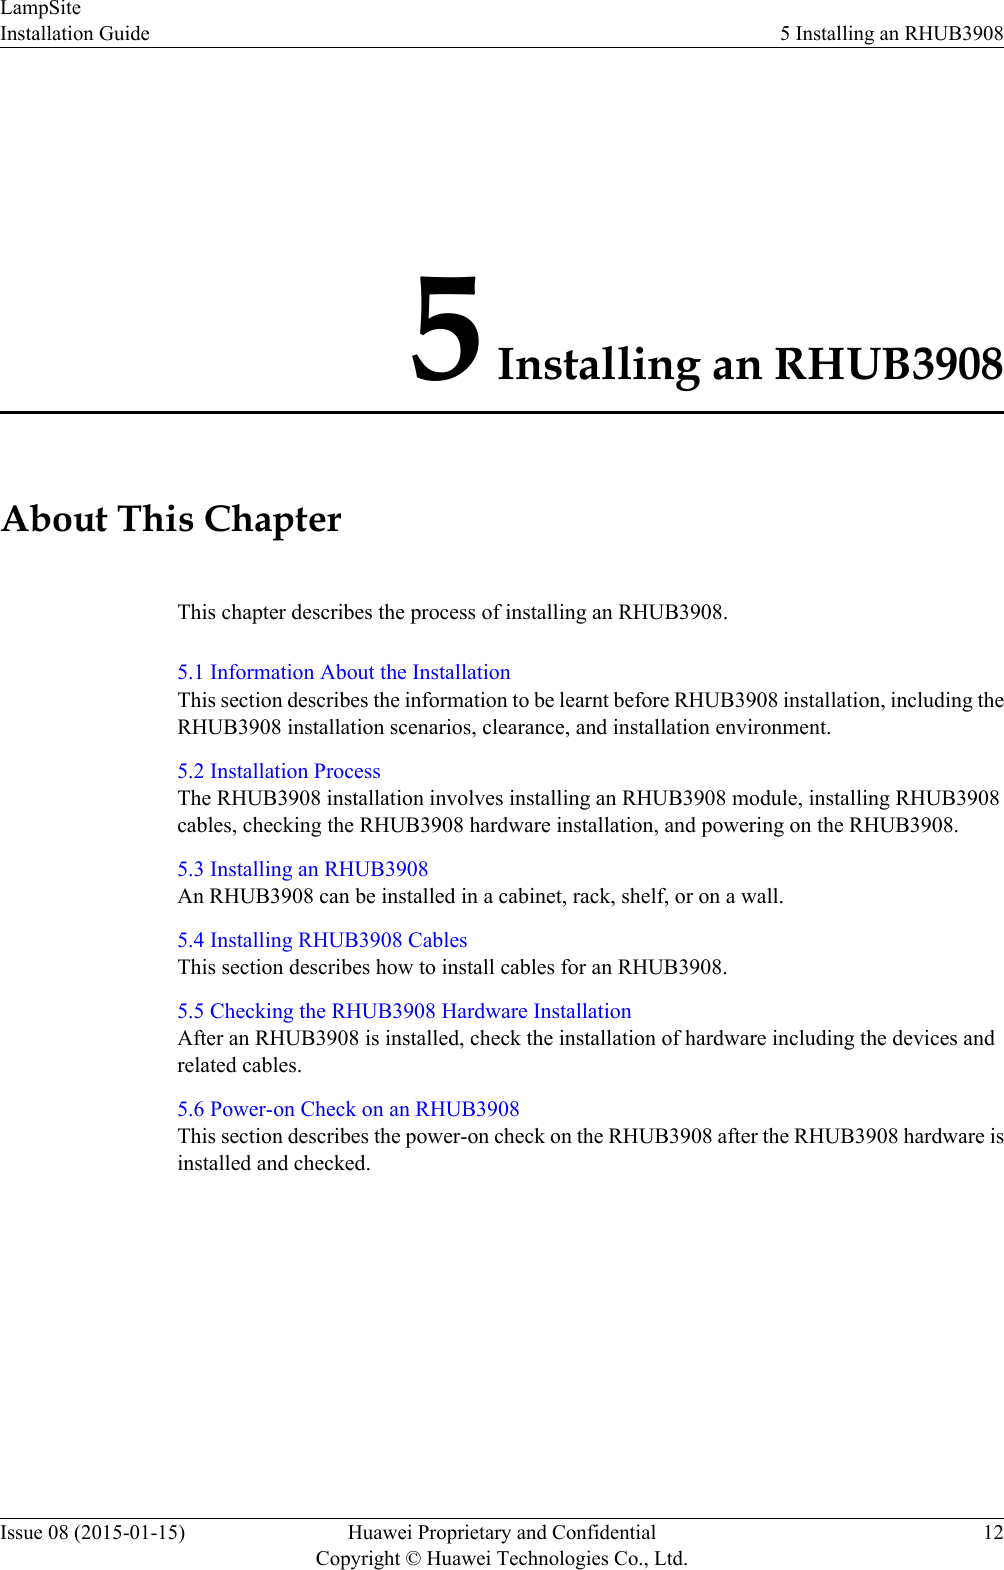 5 Installing an RHUB3908About This ChapterThis chapter describes the process of installing an RHUB3908.5.1 Information About the InstallationThis section describes the information to be learnt before RHUB3908 installation, including theRHUB3908 installation scenarios, clearance, and installation environment.5.2 Installation ProcessThe RHUB3908 installation involves installing an RHUB3908 module, installing RHUB3908cables, checking the RHUB3908 hardware installation, and powering on the RHUB3908.5.3 Installing an RHUB3908An RHUB3908 can be installed in a cabinet, rack, shelf, or on a wall.5.4 Installing RHUB3908 CablesThis section describes how to install cables for an RHUB3908.5.5 Checking the RHUB3908 Hardware InstallationAfter an RHUB3908 is installed, check the installation of hardware including the devices andrelated cables.5.6 Power-on Check on an RHUB3908This section describes the power-on check on the RHUB3908 after the RHUB3908 hardware isinstalled and checked.LampSiteInstallation Guide 5 Installing an RHUB3908Issue 08 (2015-01-15) Huawei Proprietary and ConfidentialCopyright © Huawei Technologies Co., Ltd.12